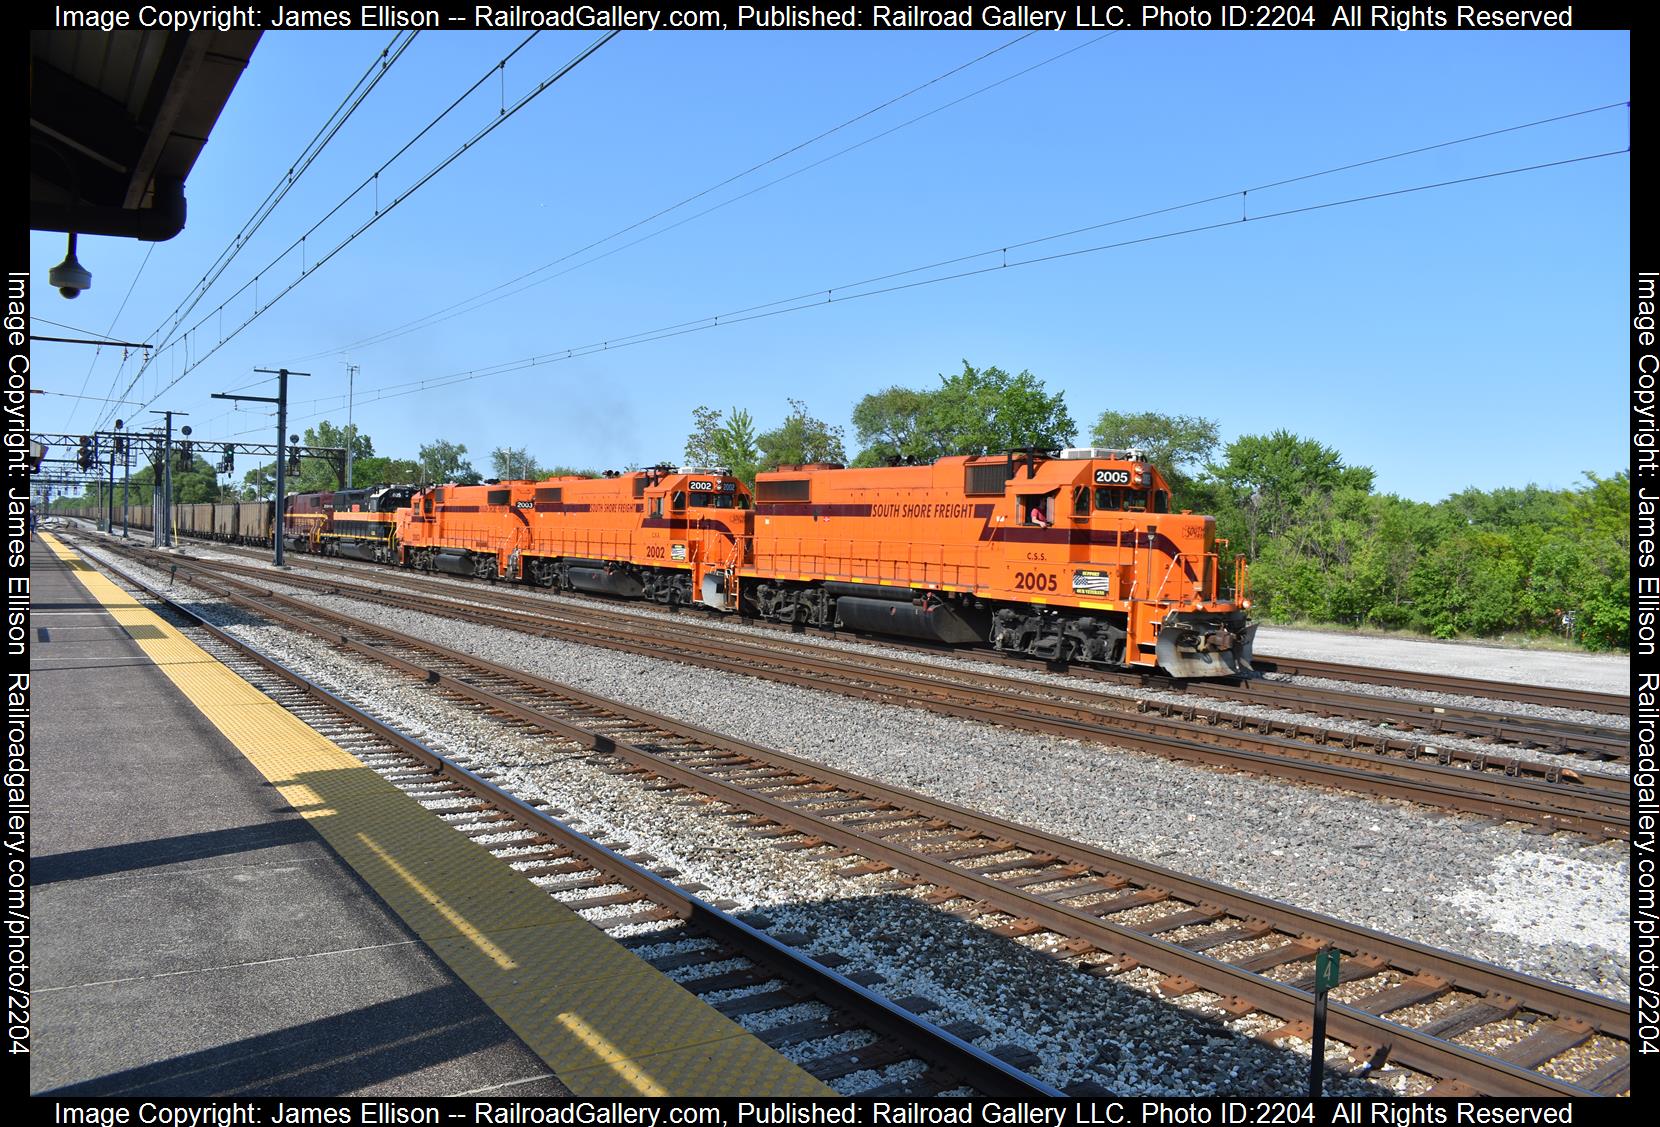 CSS 2005 is a class EMD GP38-2 and  is pictured in Chicago, Illinois, USA.  This was taken along the CN Ex-IC on the Canadian National Railway. Photo Copyright: James Ellison uploaded to Railroad Gallery on 07/07/2023. This photograph of CSS 2005 was taken on Saturday, May 20, 2023. All Rights Reserved. 